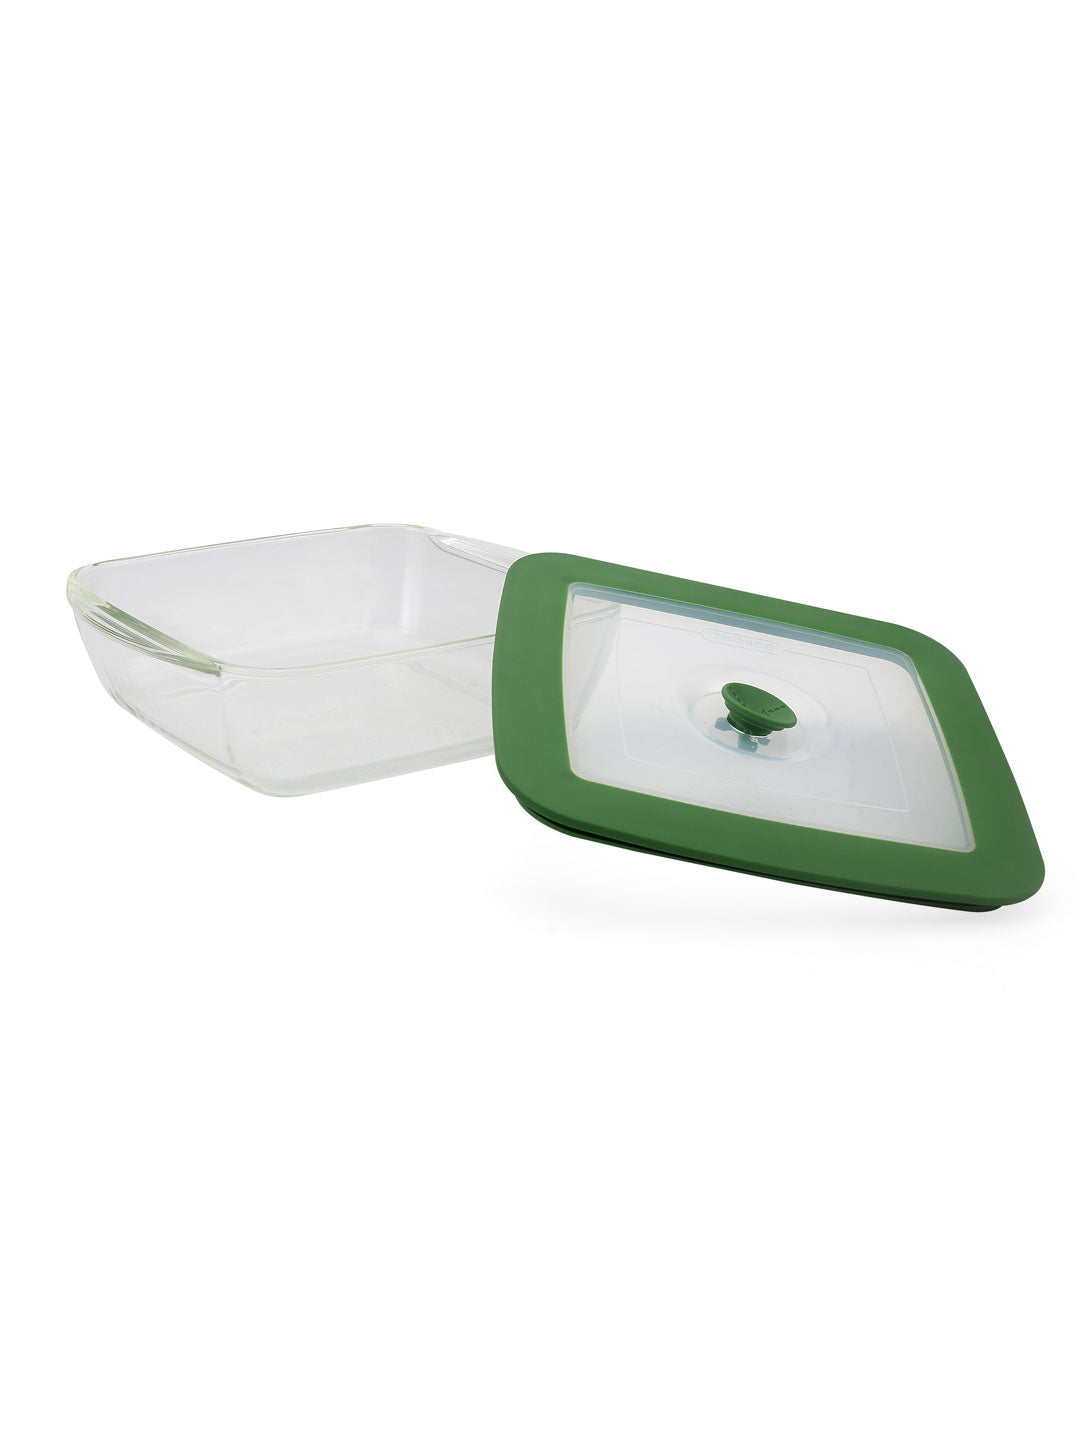 Square 2.2 Litre Dish with Lid (Clear)